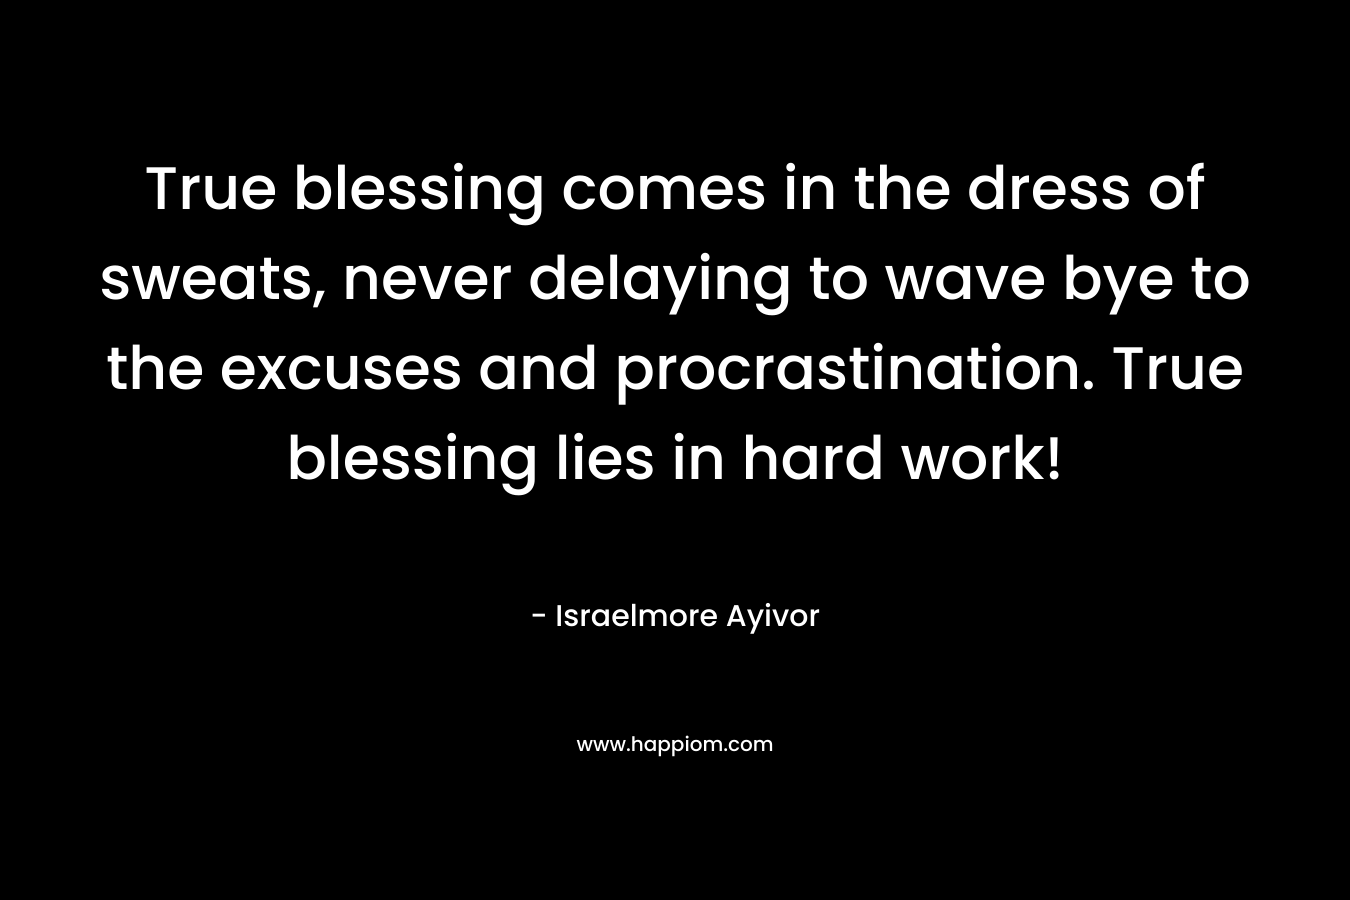 True blessing comes in the dress of sweats, never delaying to wave bye to the excuses and procrastination. True blessing lies in hard work!